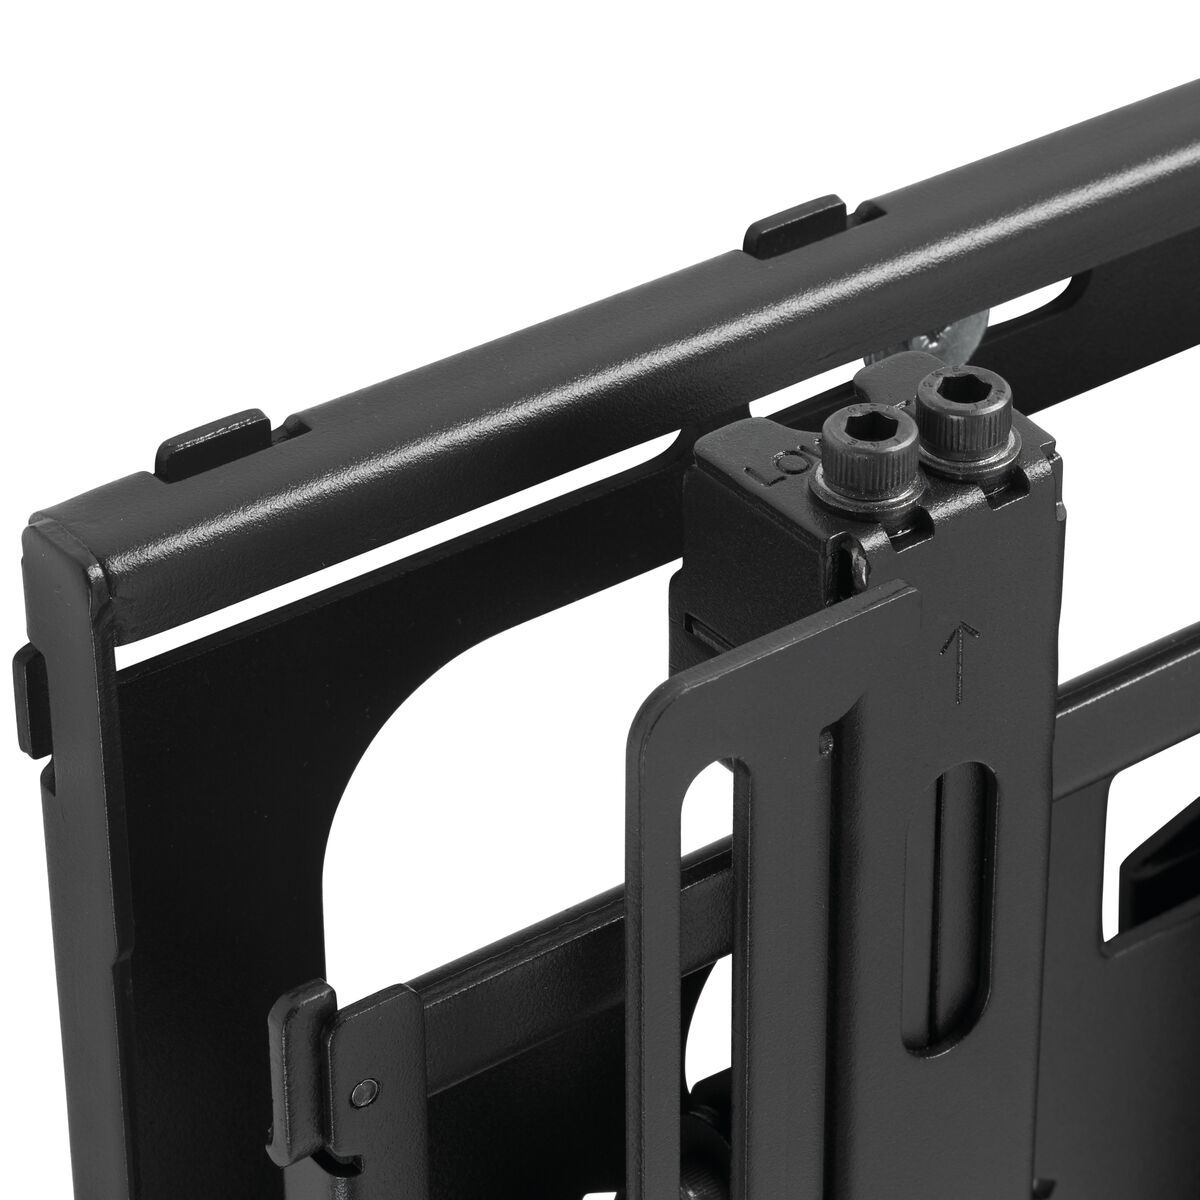 Vogel's PFW 6885 Video Wall Pop-out Wall Mount